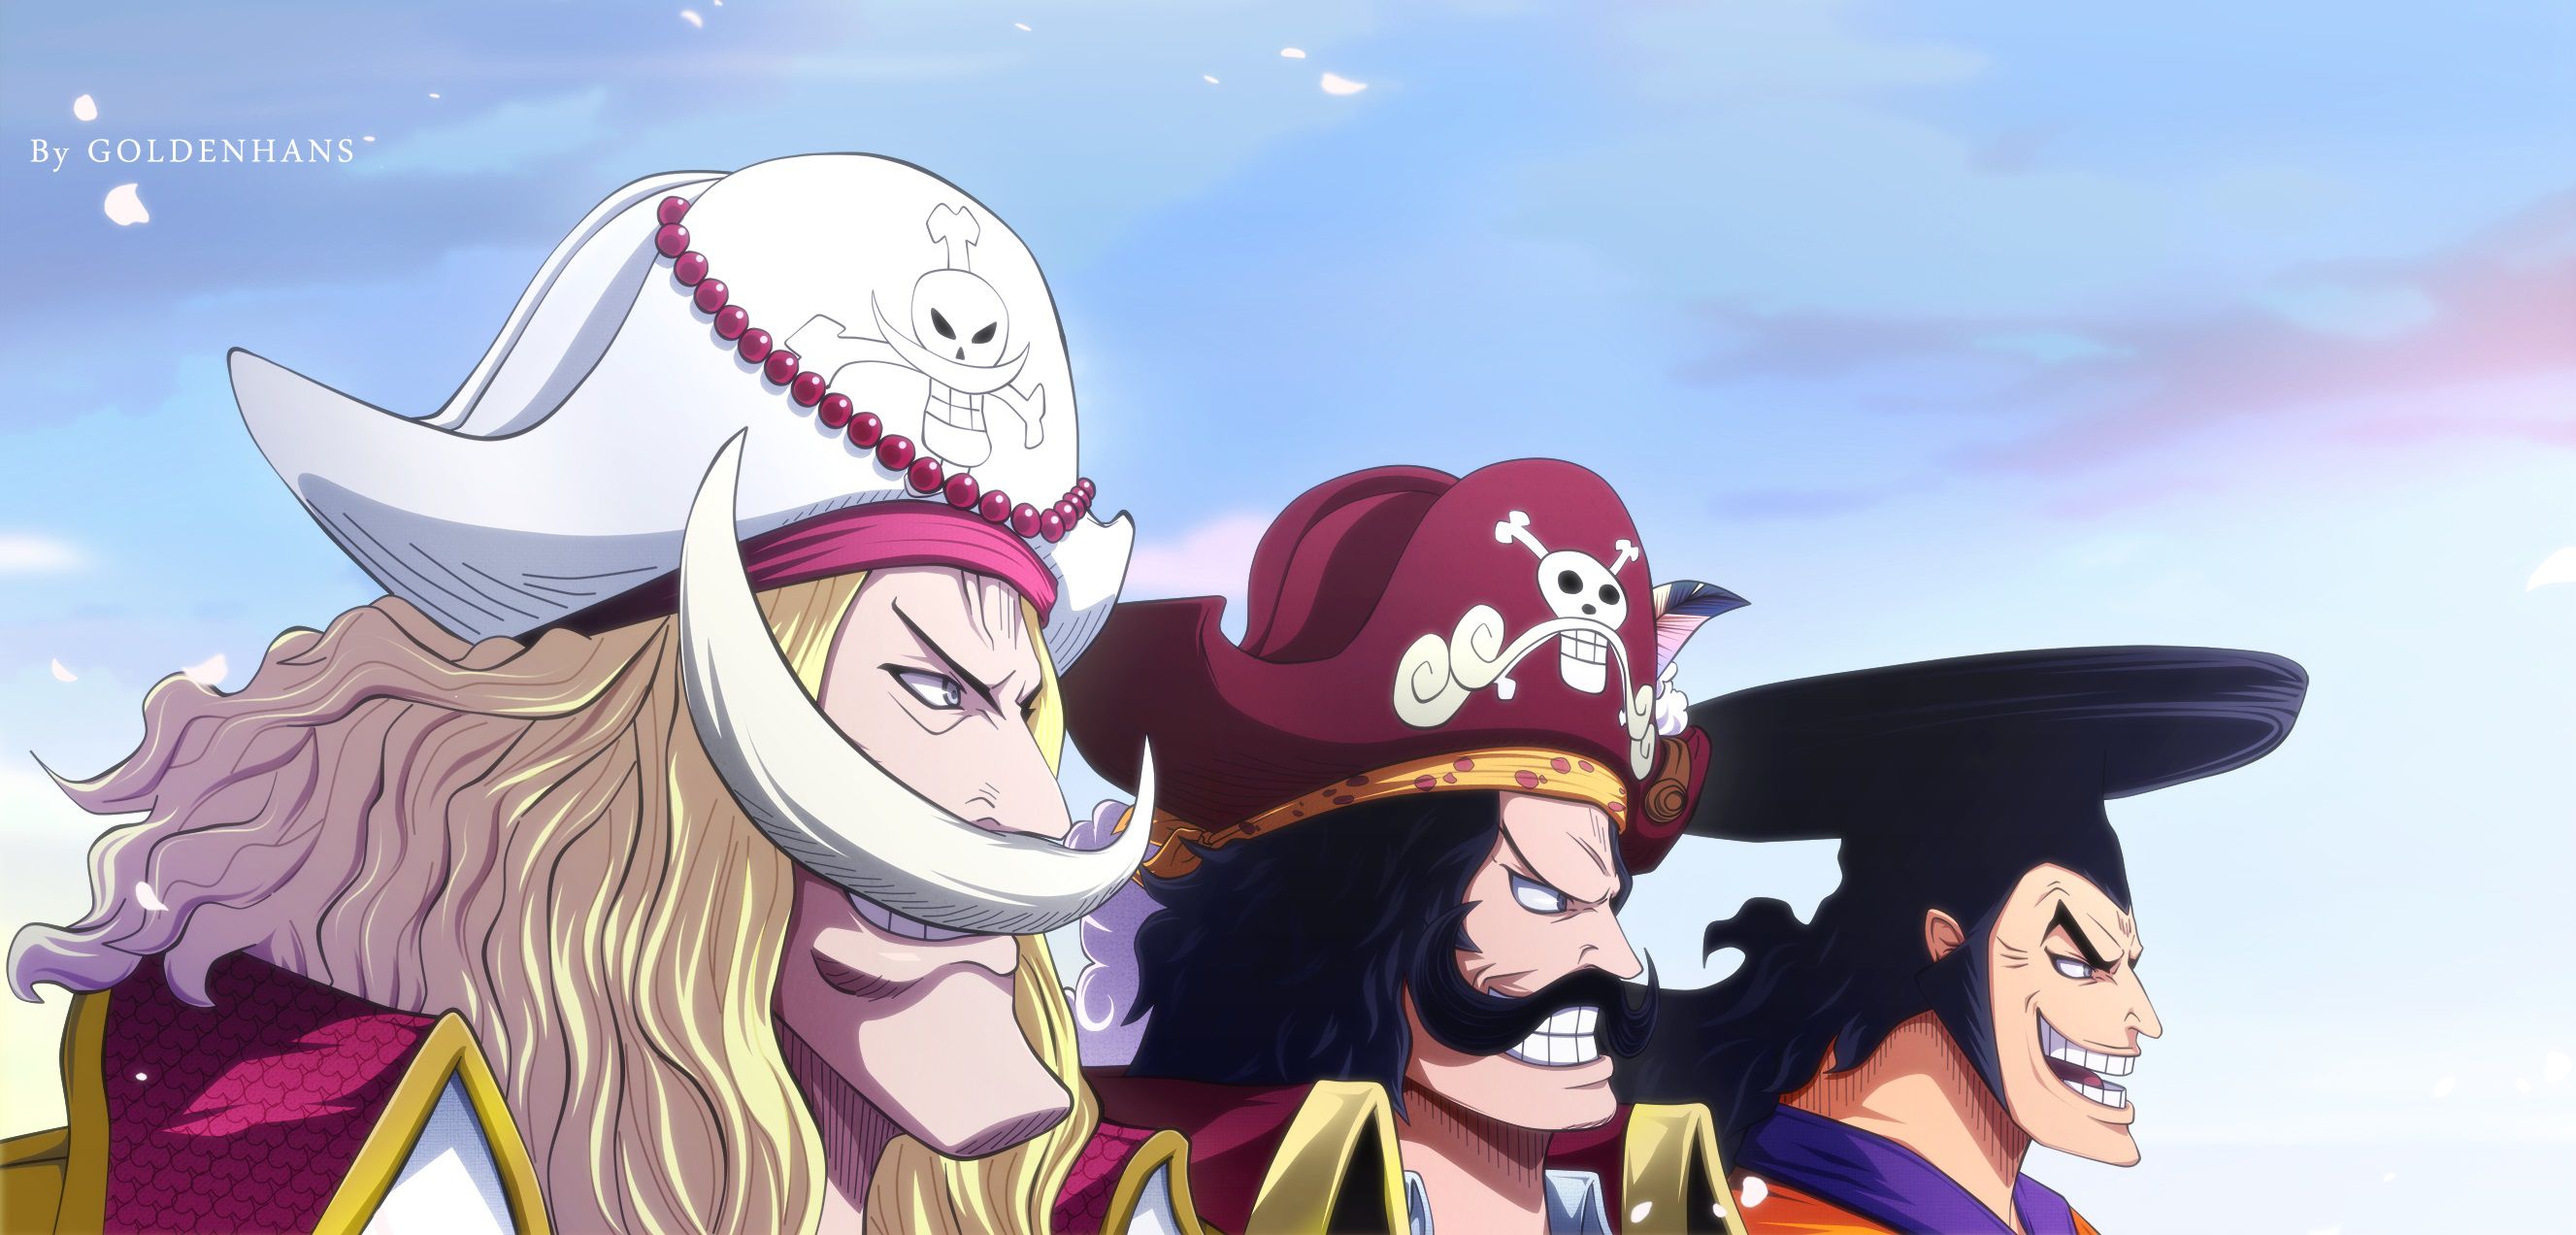 ONE PIECE: An epic clash in the explosive preview of Episode 965